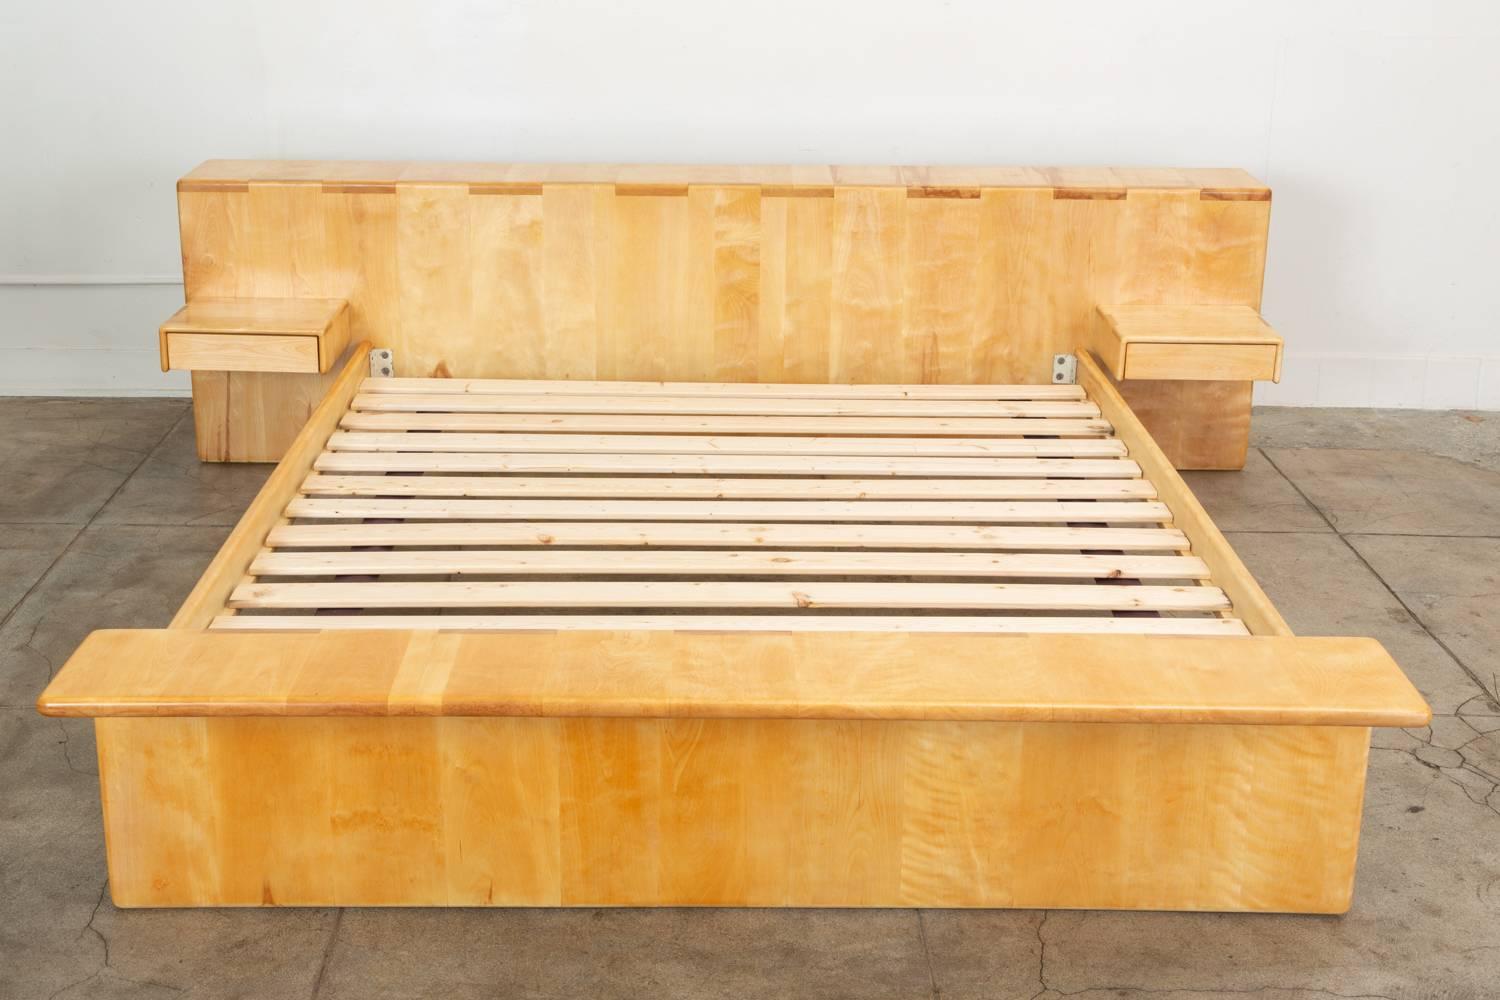 A generously proportioned platform bed by California designer and woodworker Gerald McCabe for his company Erin Furniture. This example in solid maple with wide box joints has two floating nightstands and fits a California King mattress. The wide